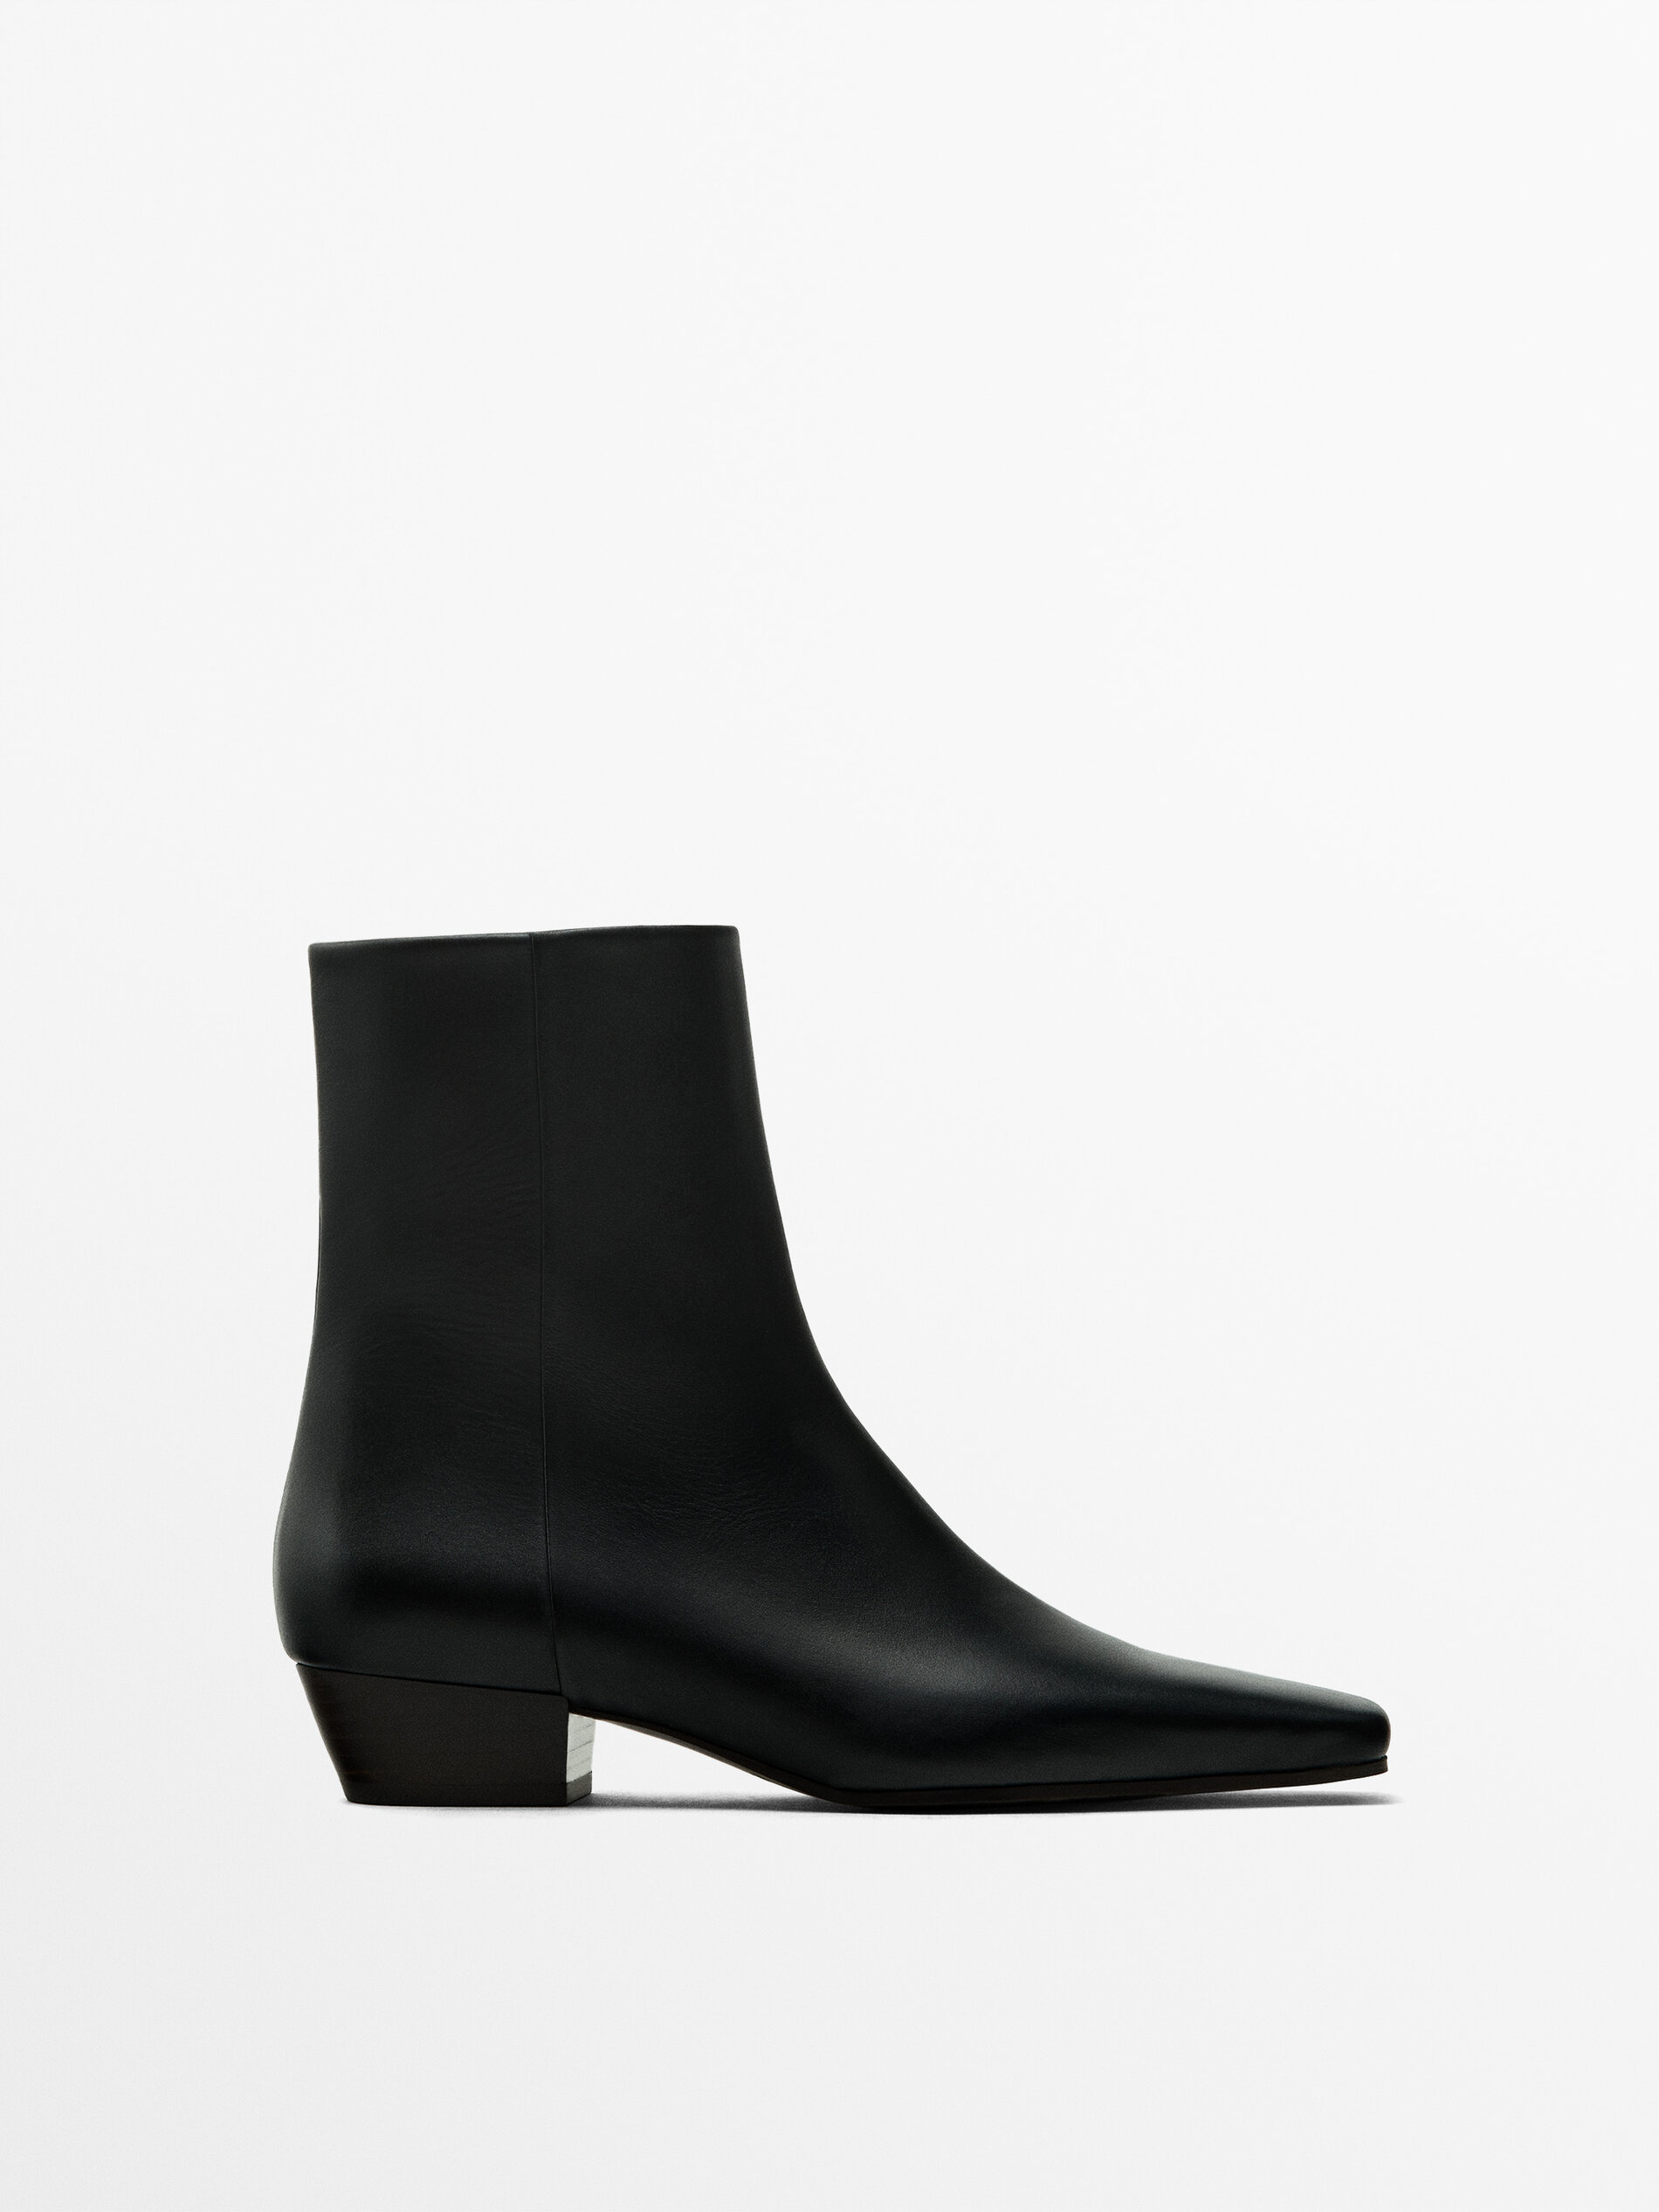 Isabel pointy ankle boots black leather | Atelier Rangoni